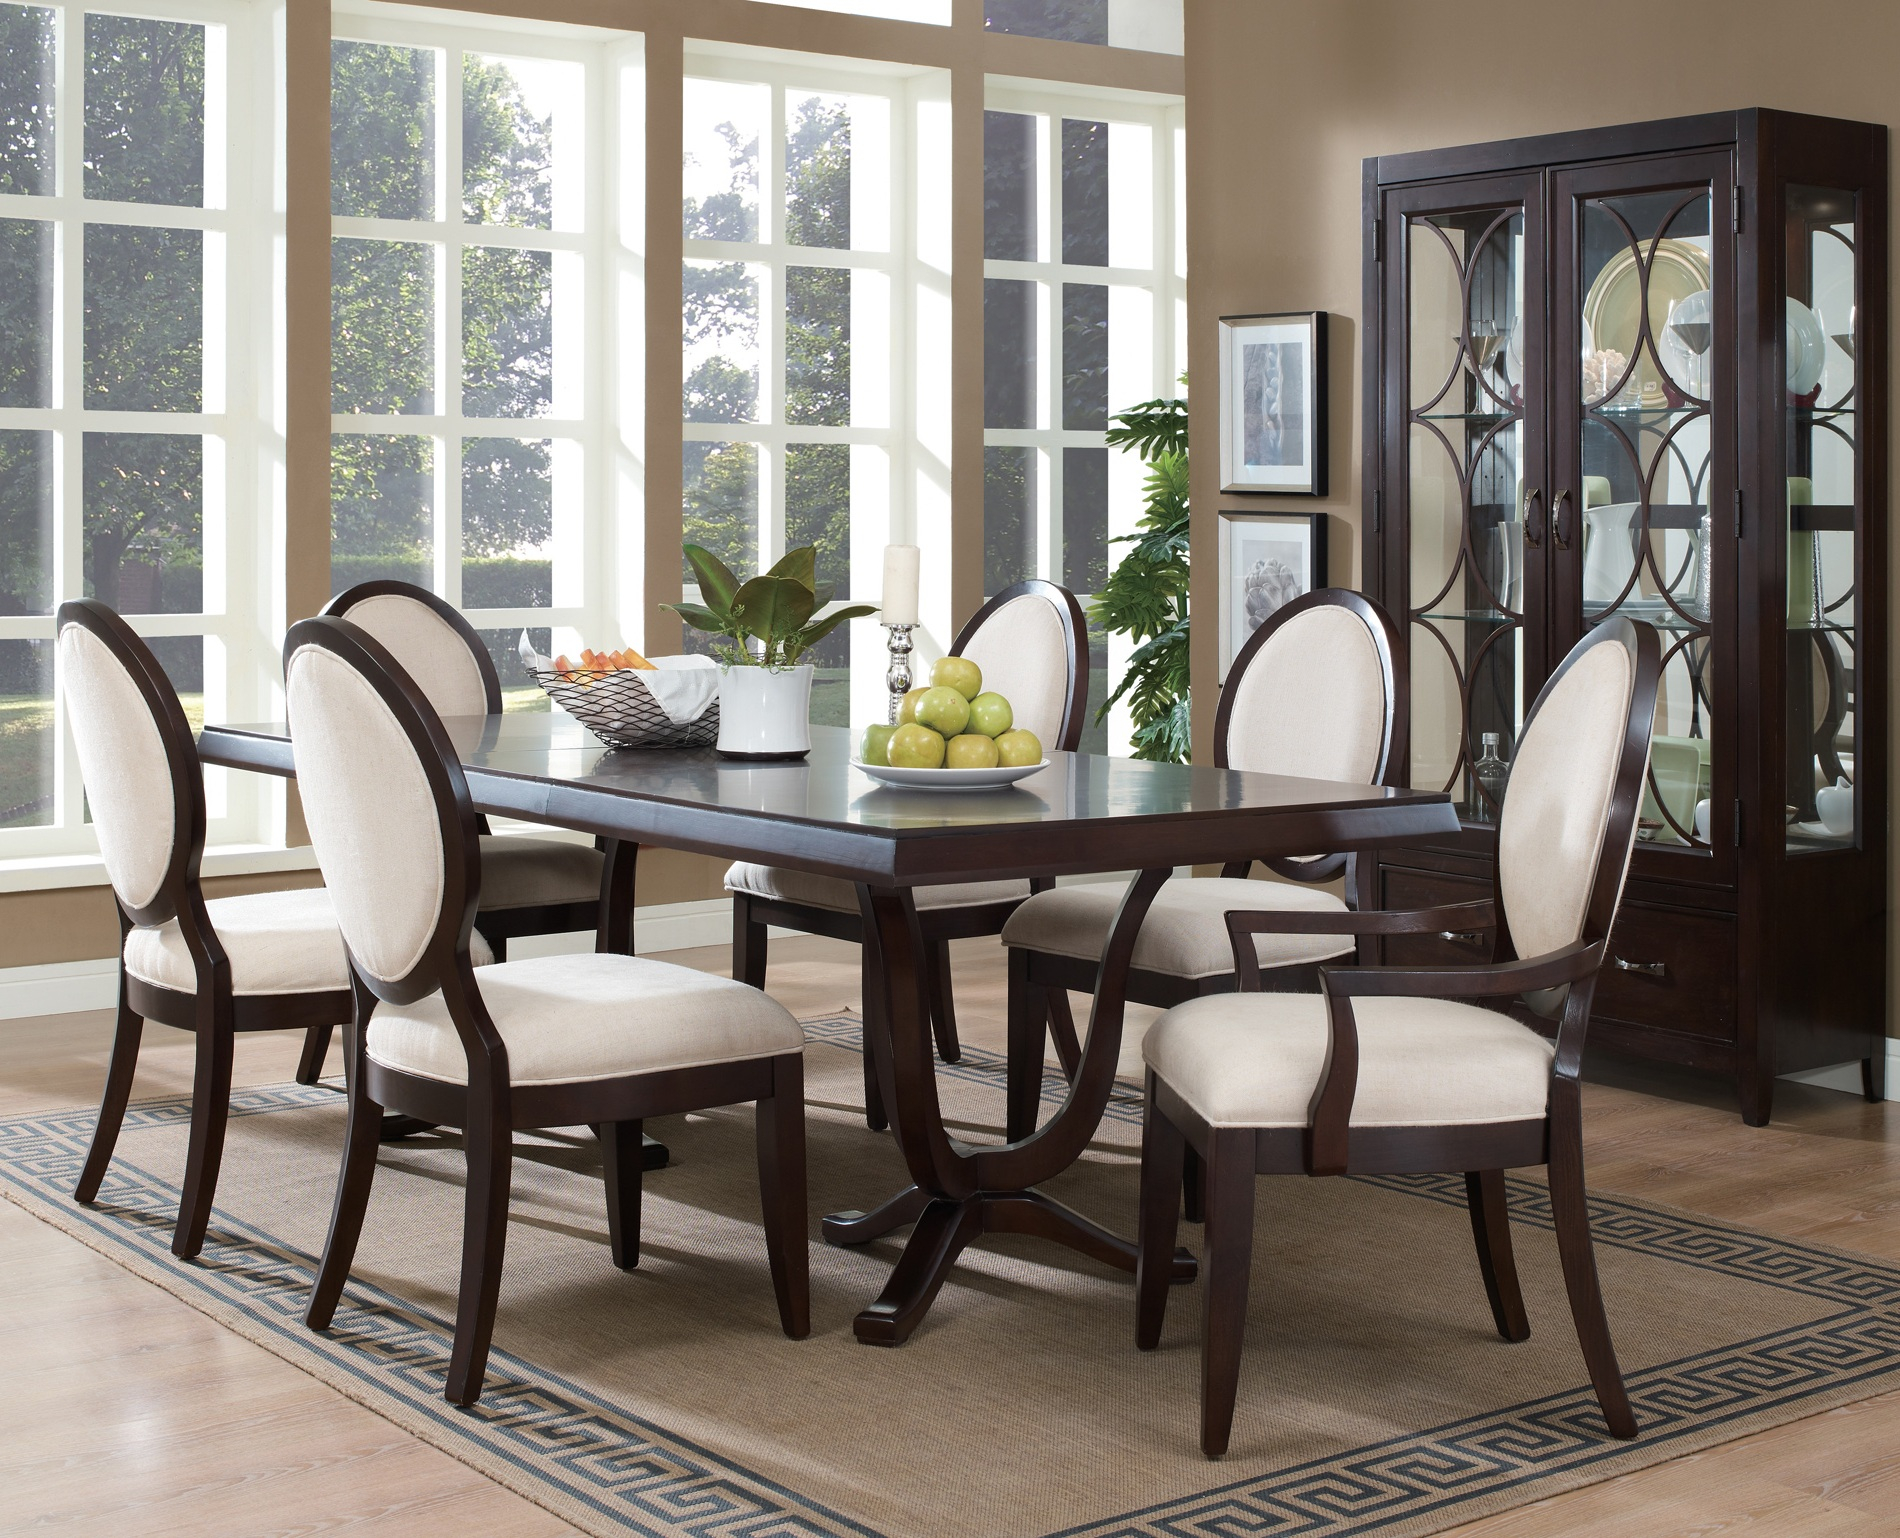 Dining Room Tables For Sale South Africa